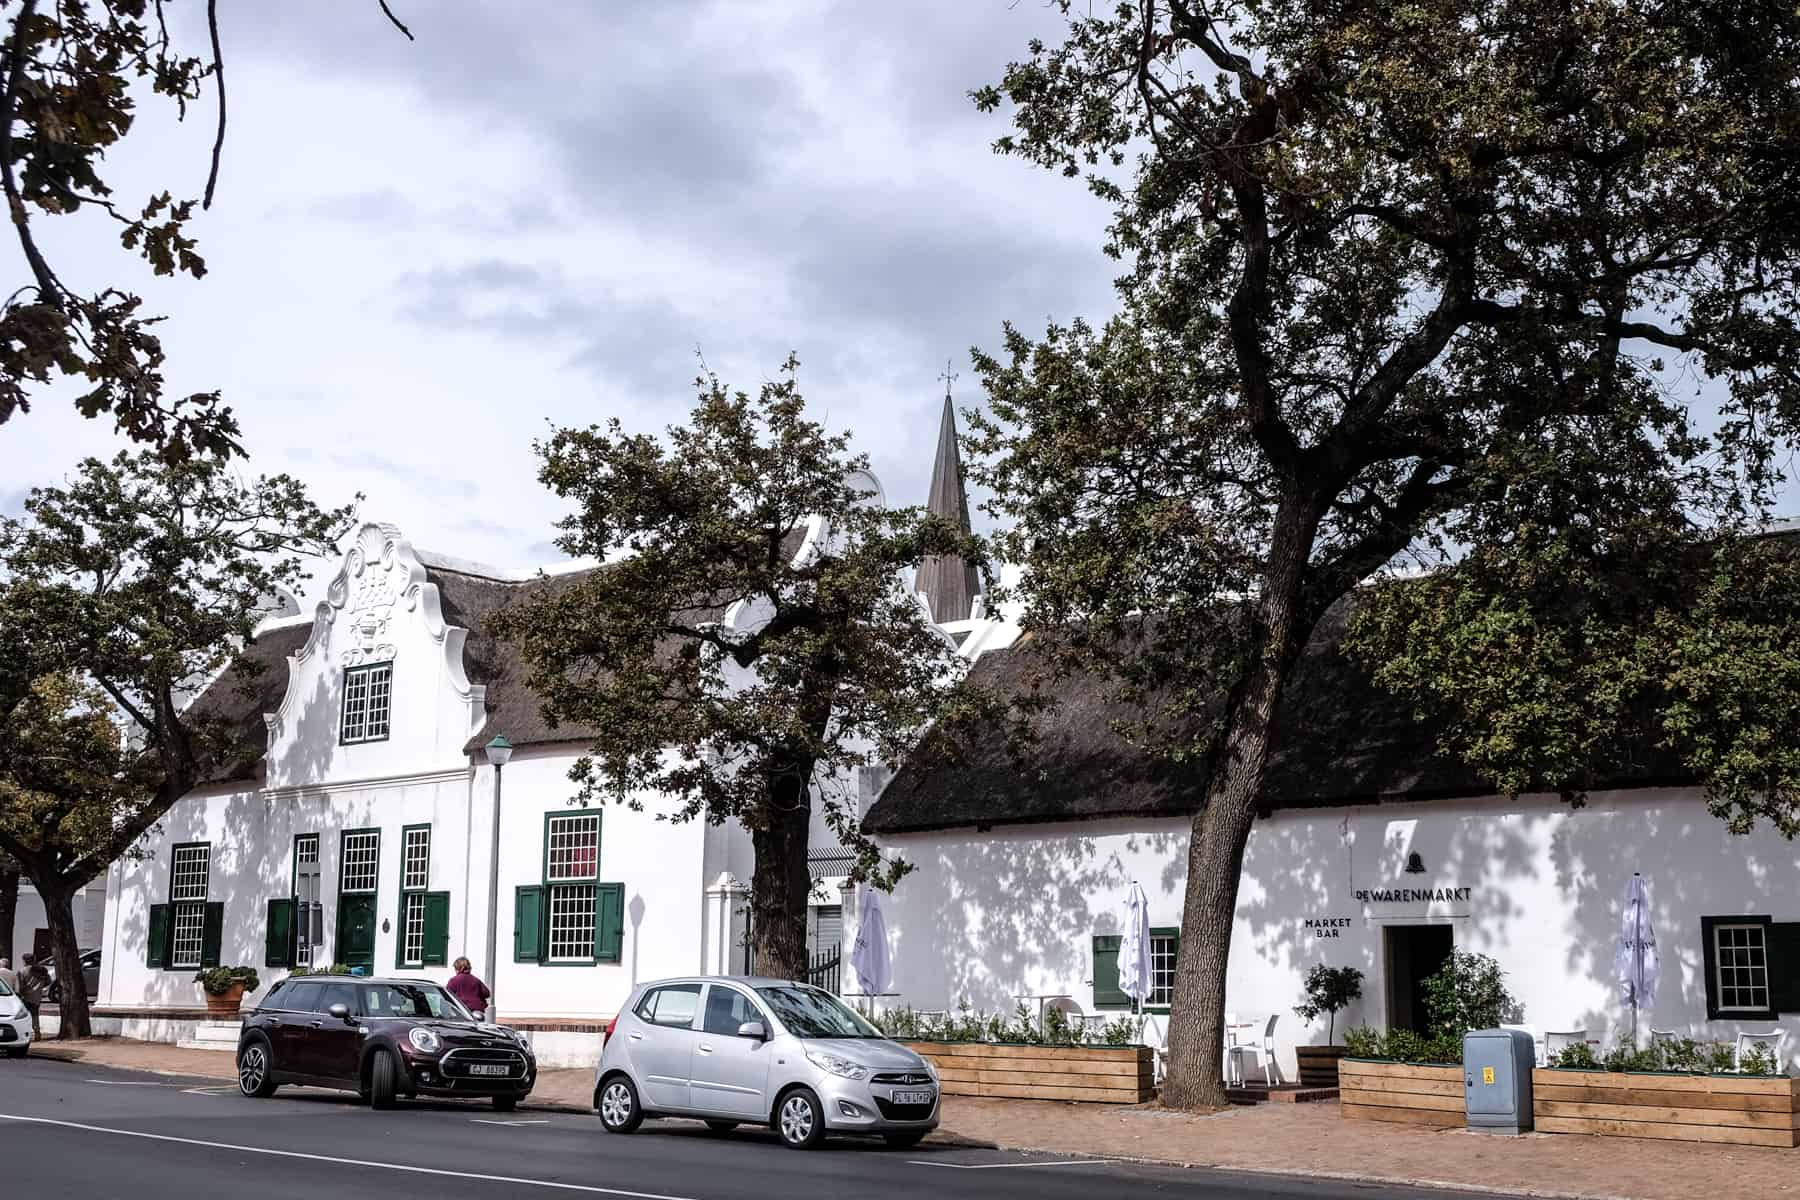 A long white classic-style building with a dark brown thatched roof surrounded by trees - the exterior of the De Warenmarkt market bar in Stellenbosch 